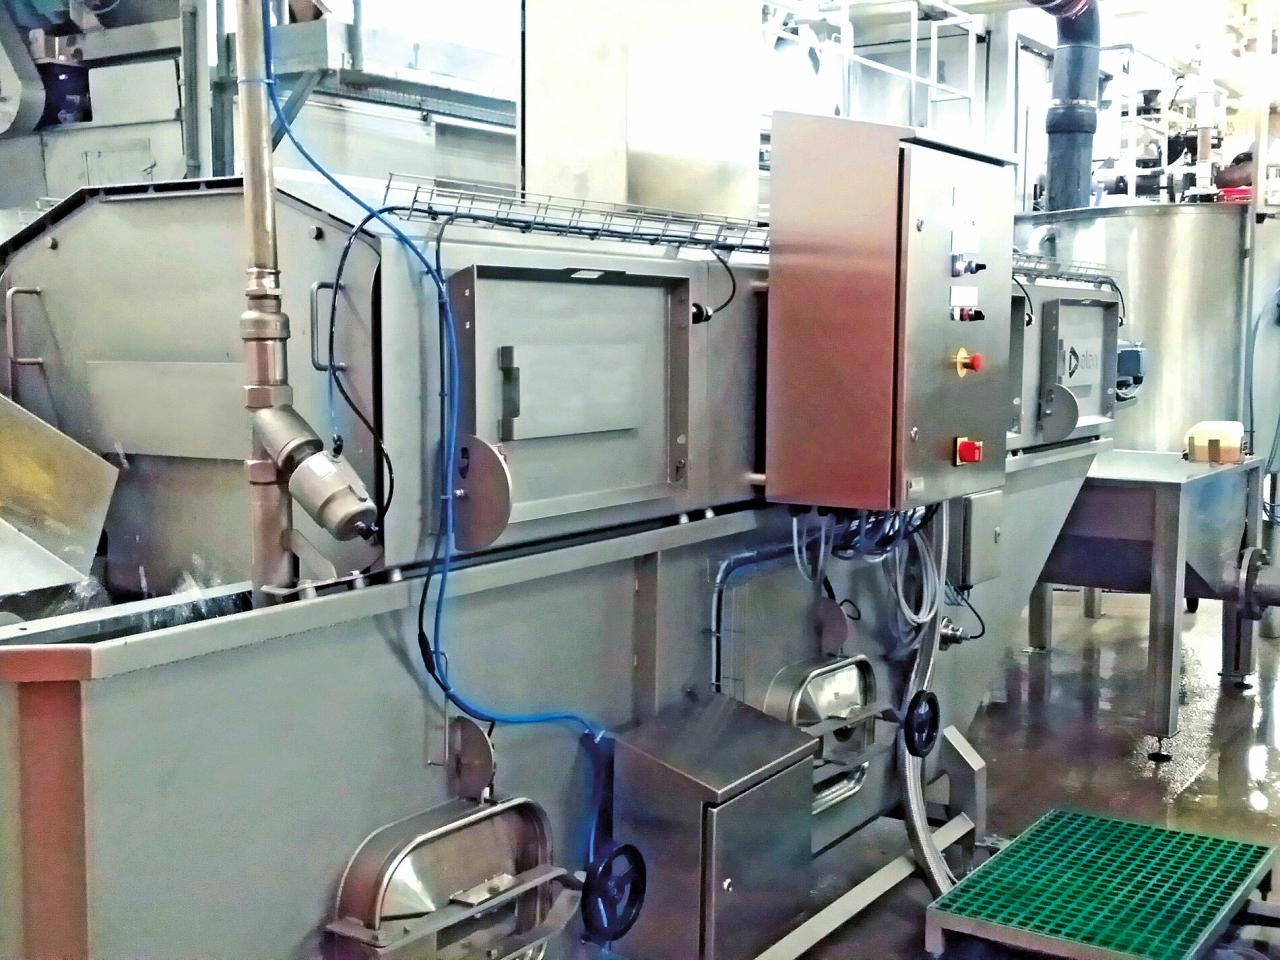 Food processing manufacturing equipment industry production custom assembly plant services machine large fabrication benefits iowa